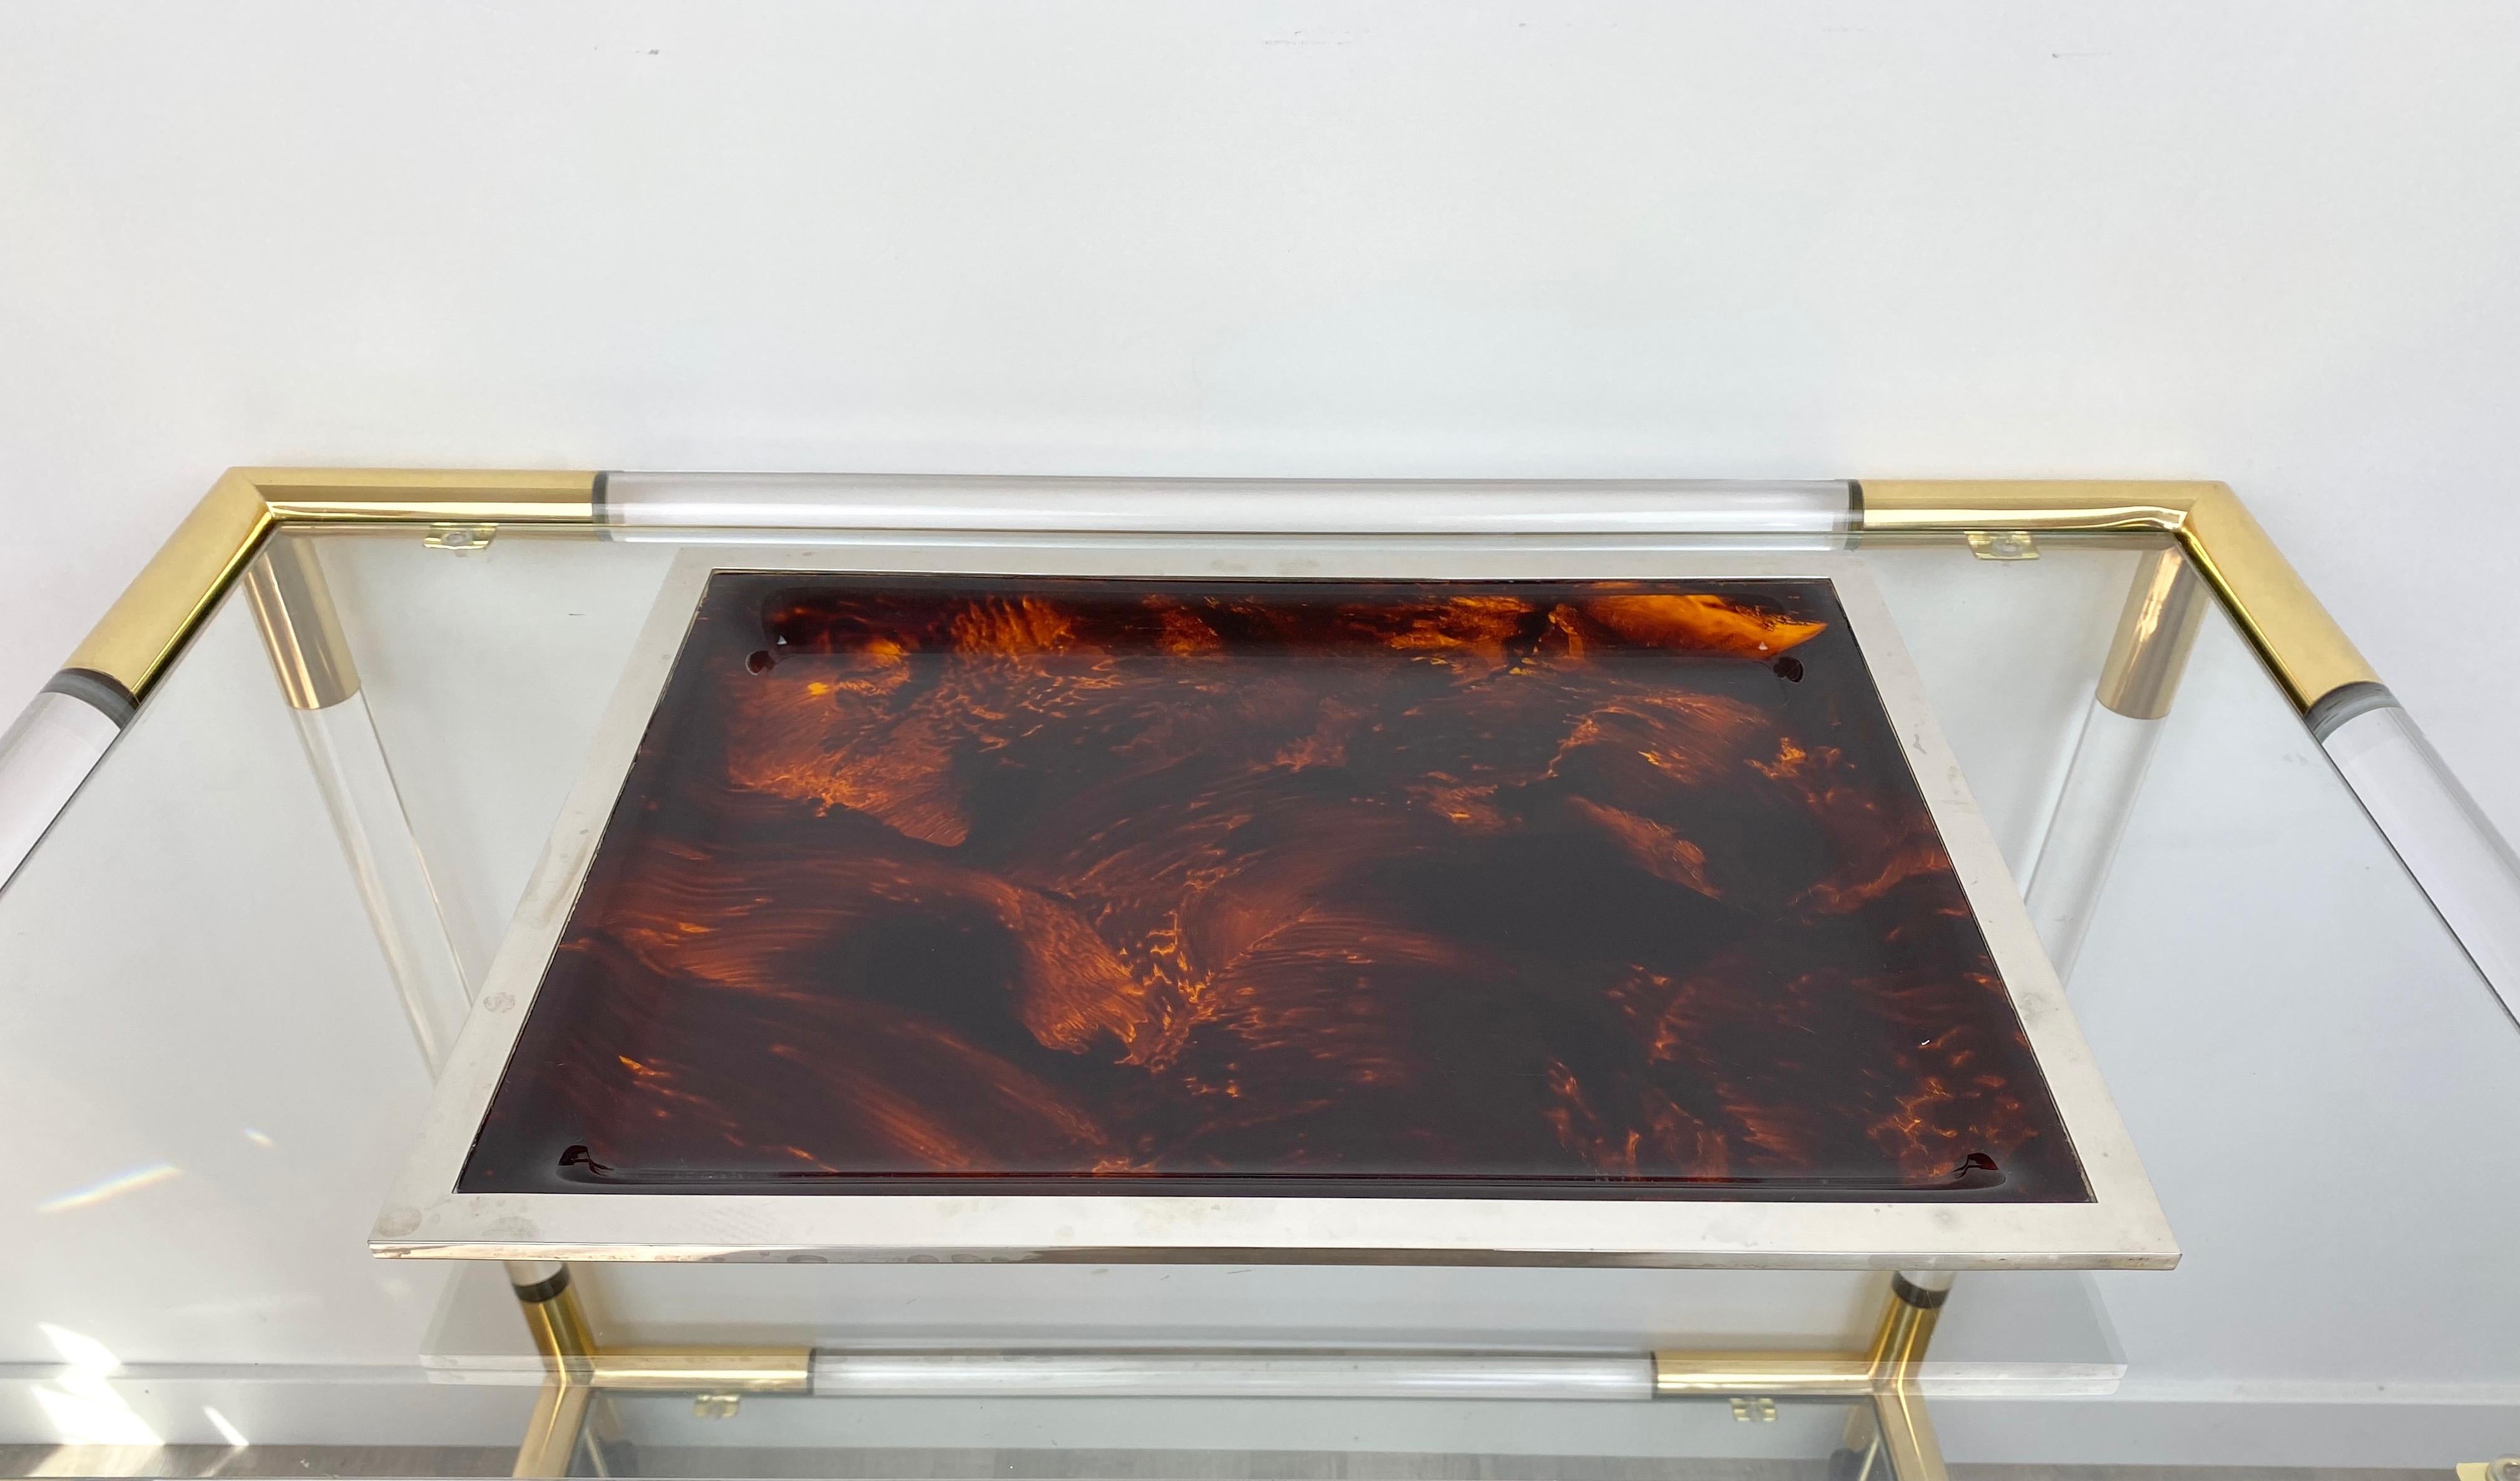 Rectangular serving tray by Christian Dior in tortoiseshell effect Lucite and chrome borders. France, circa 1970.